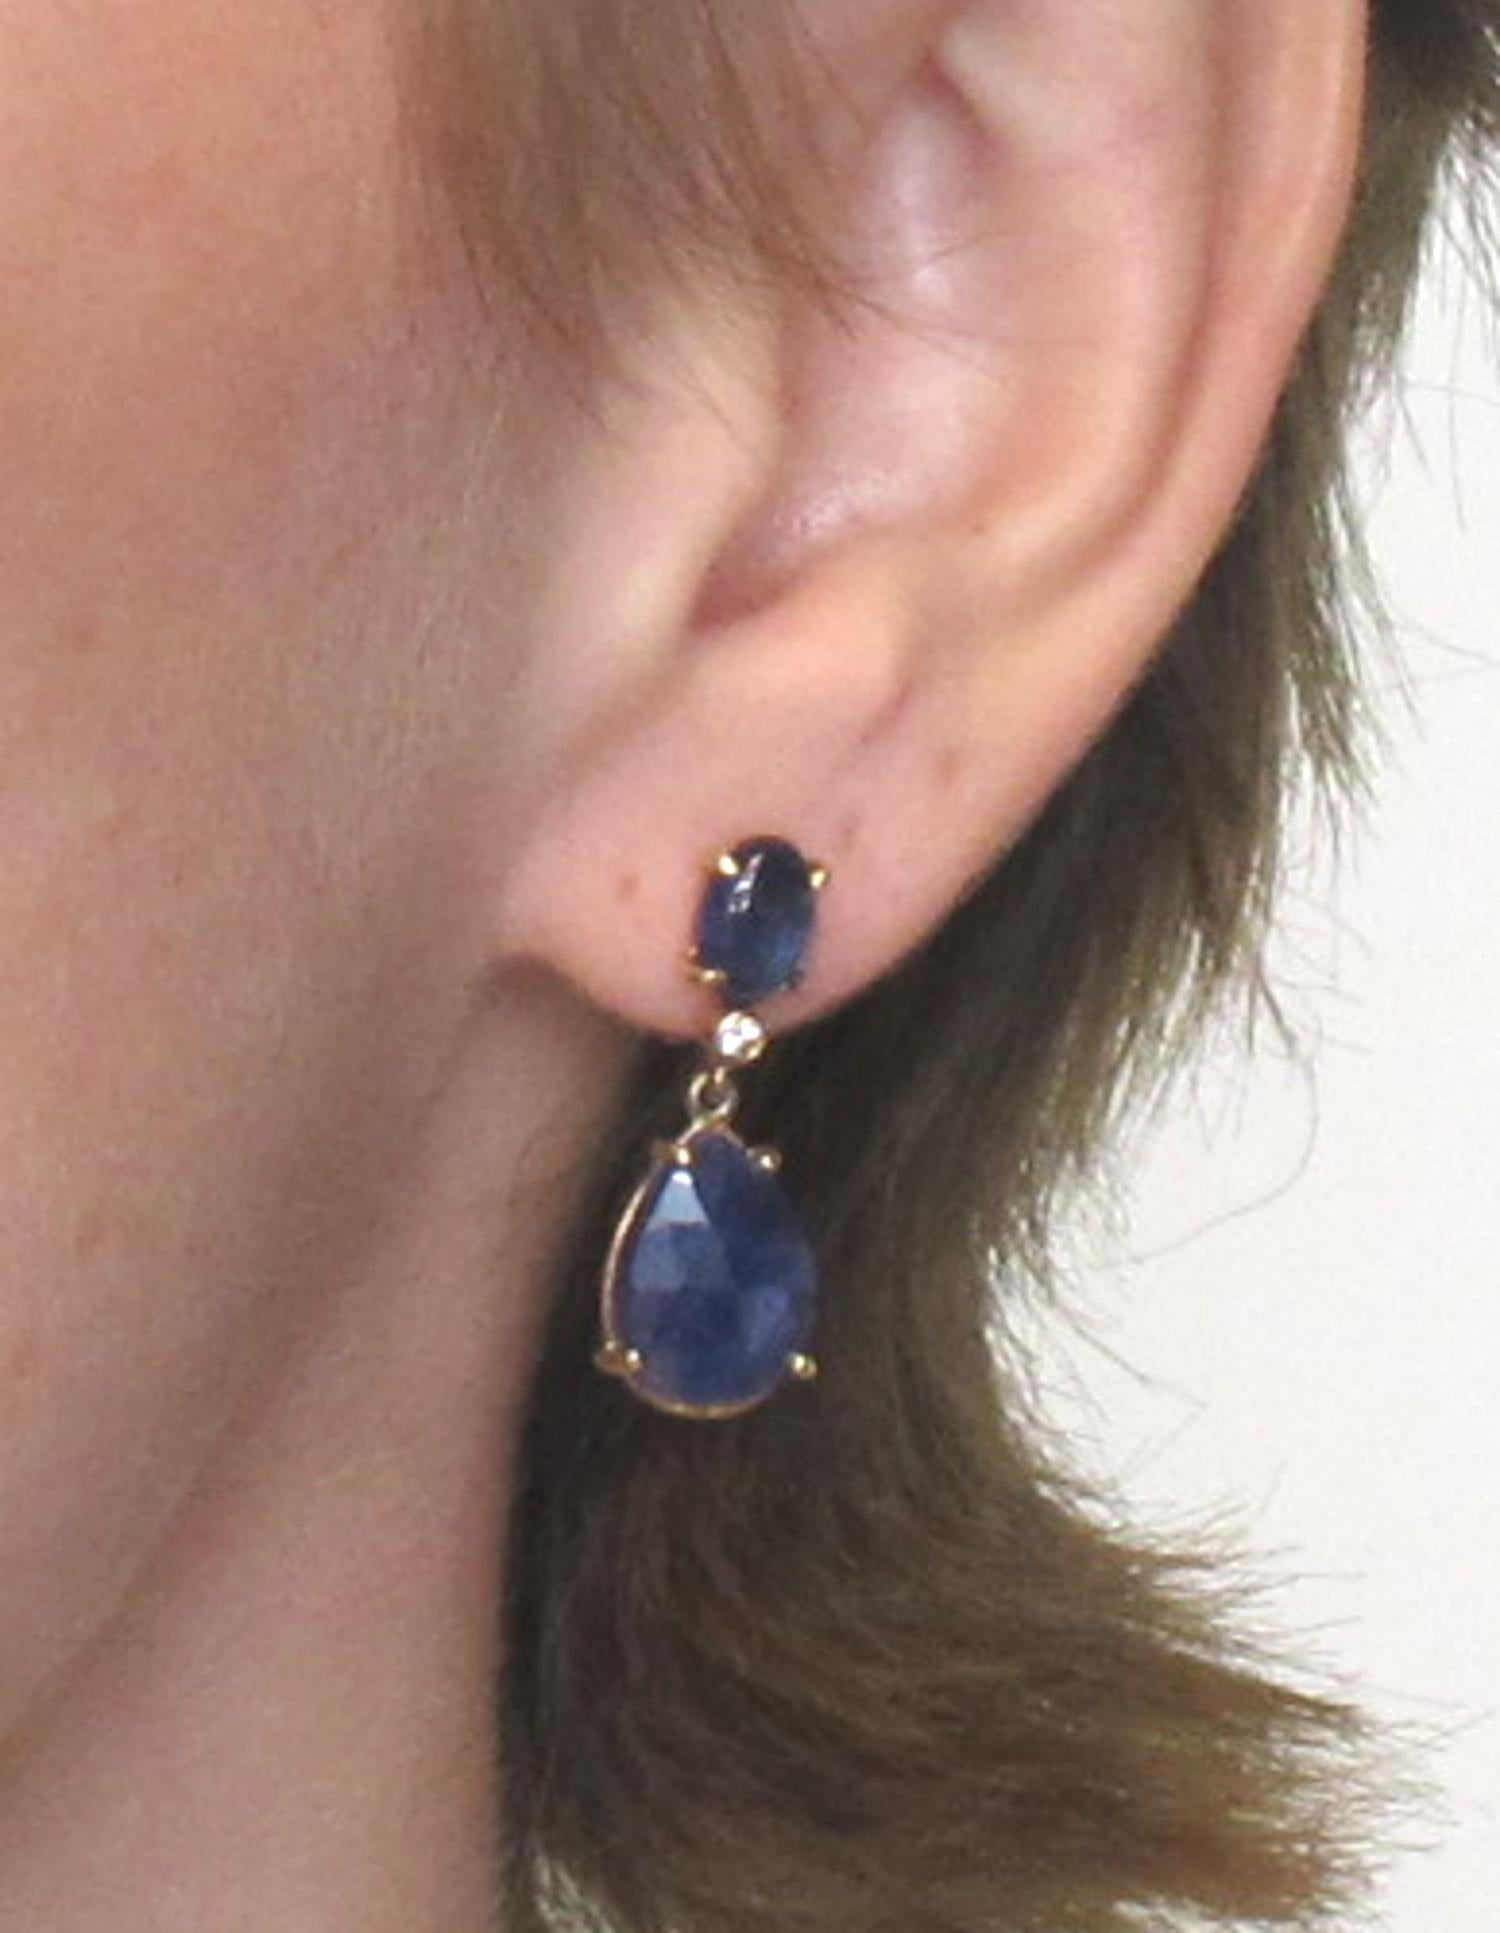 Denim blue cabochon cut and  rose cut sapphires weighing  10.14 carats total are set with round brilliant cut diamonds weighing  0.10 carats total in these beautiful earrings. They are unusual and suitable for everyday wear but could be dressed up